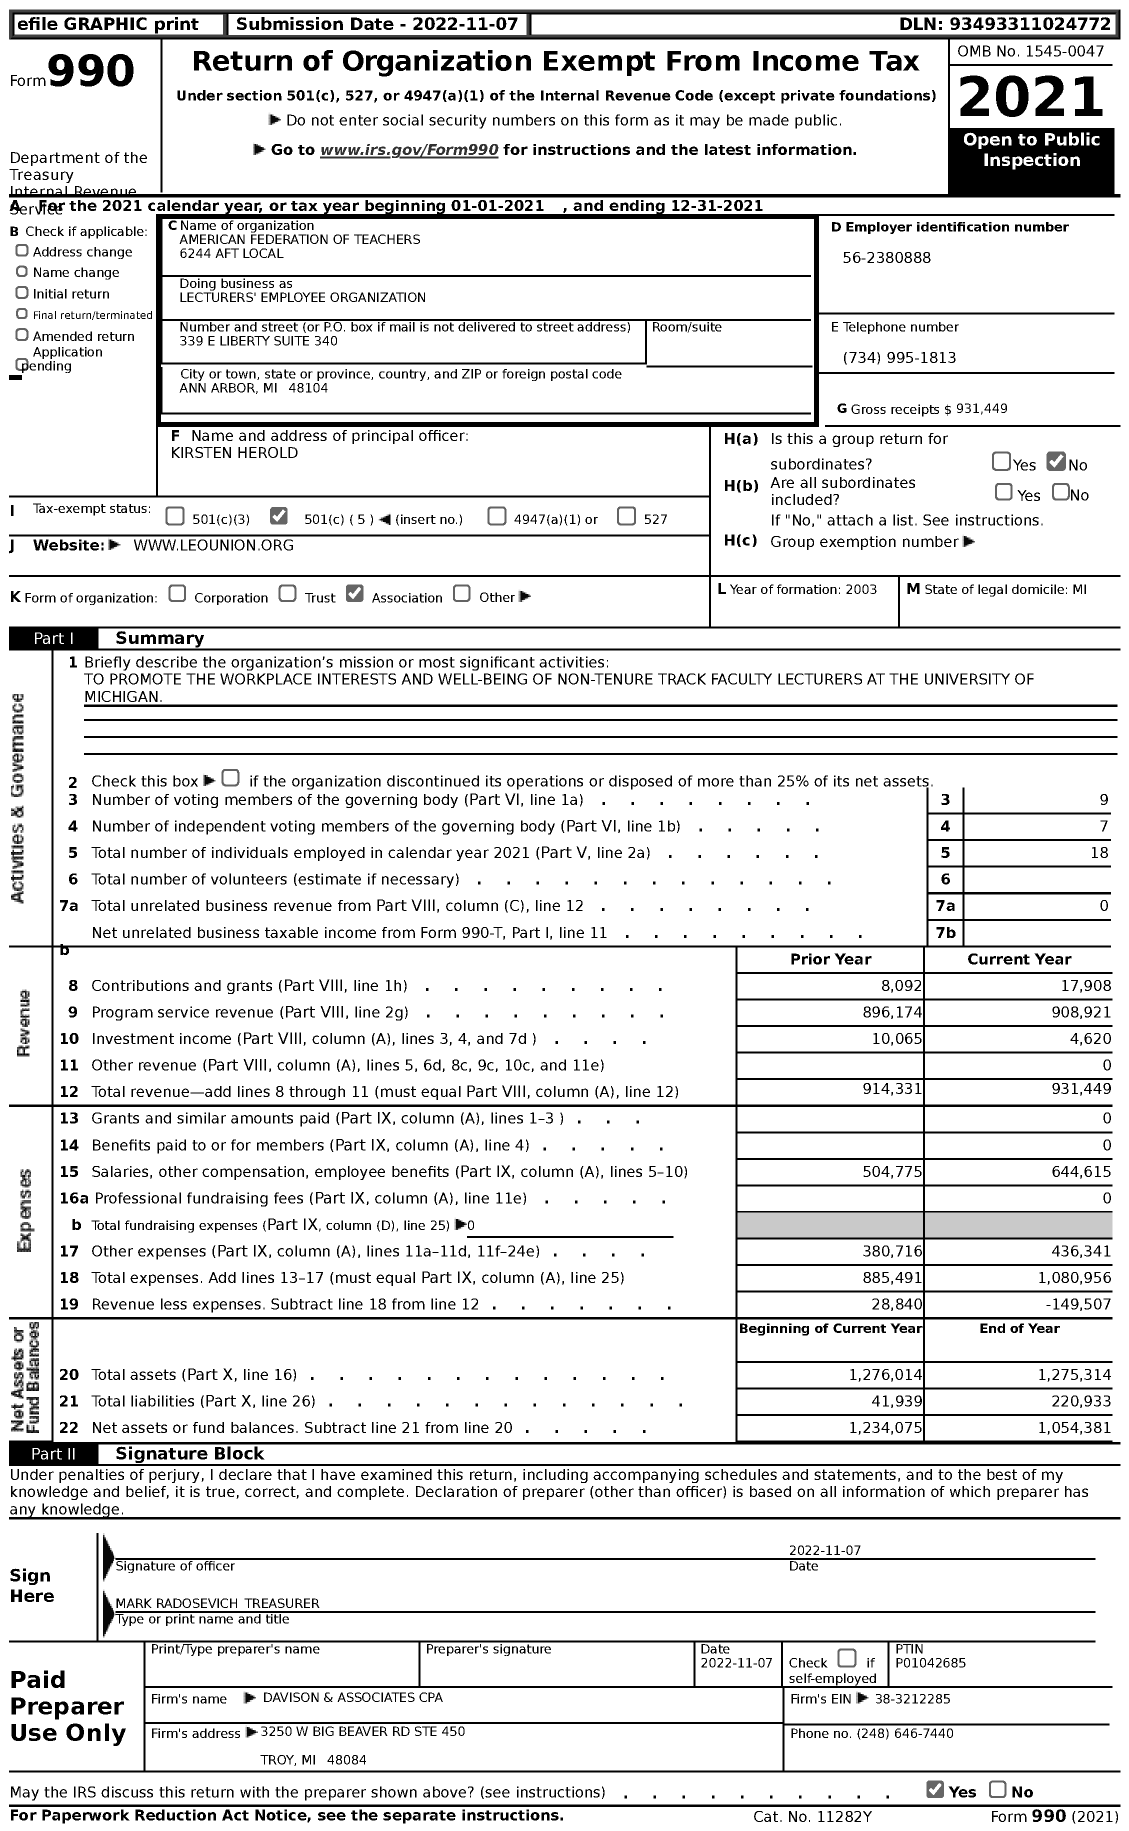 Image of first page of 2021 Form 990 for American Federation of Teachers - Lecturers' Employee Organization